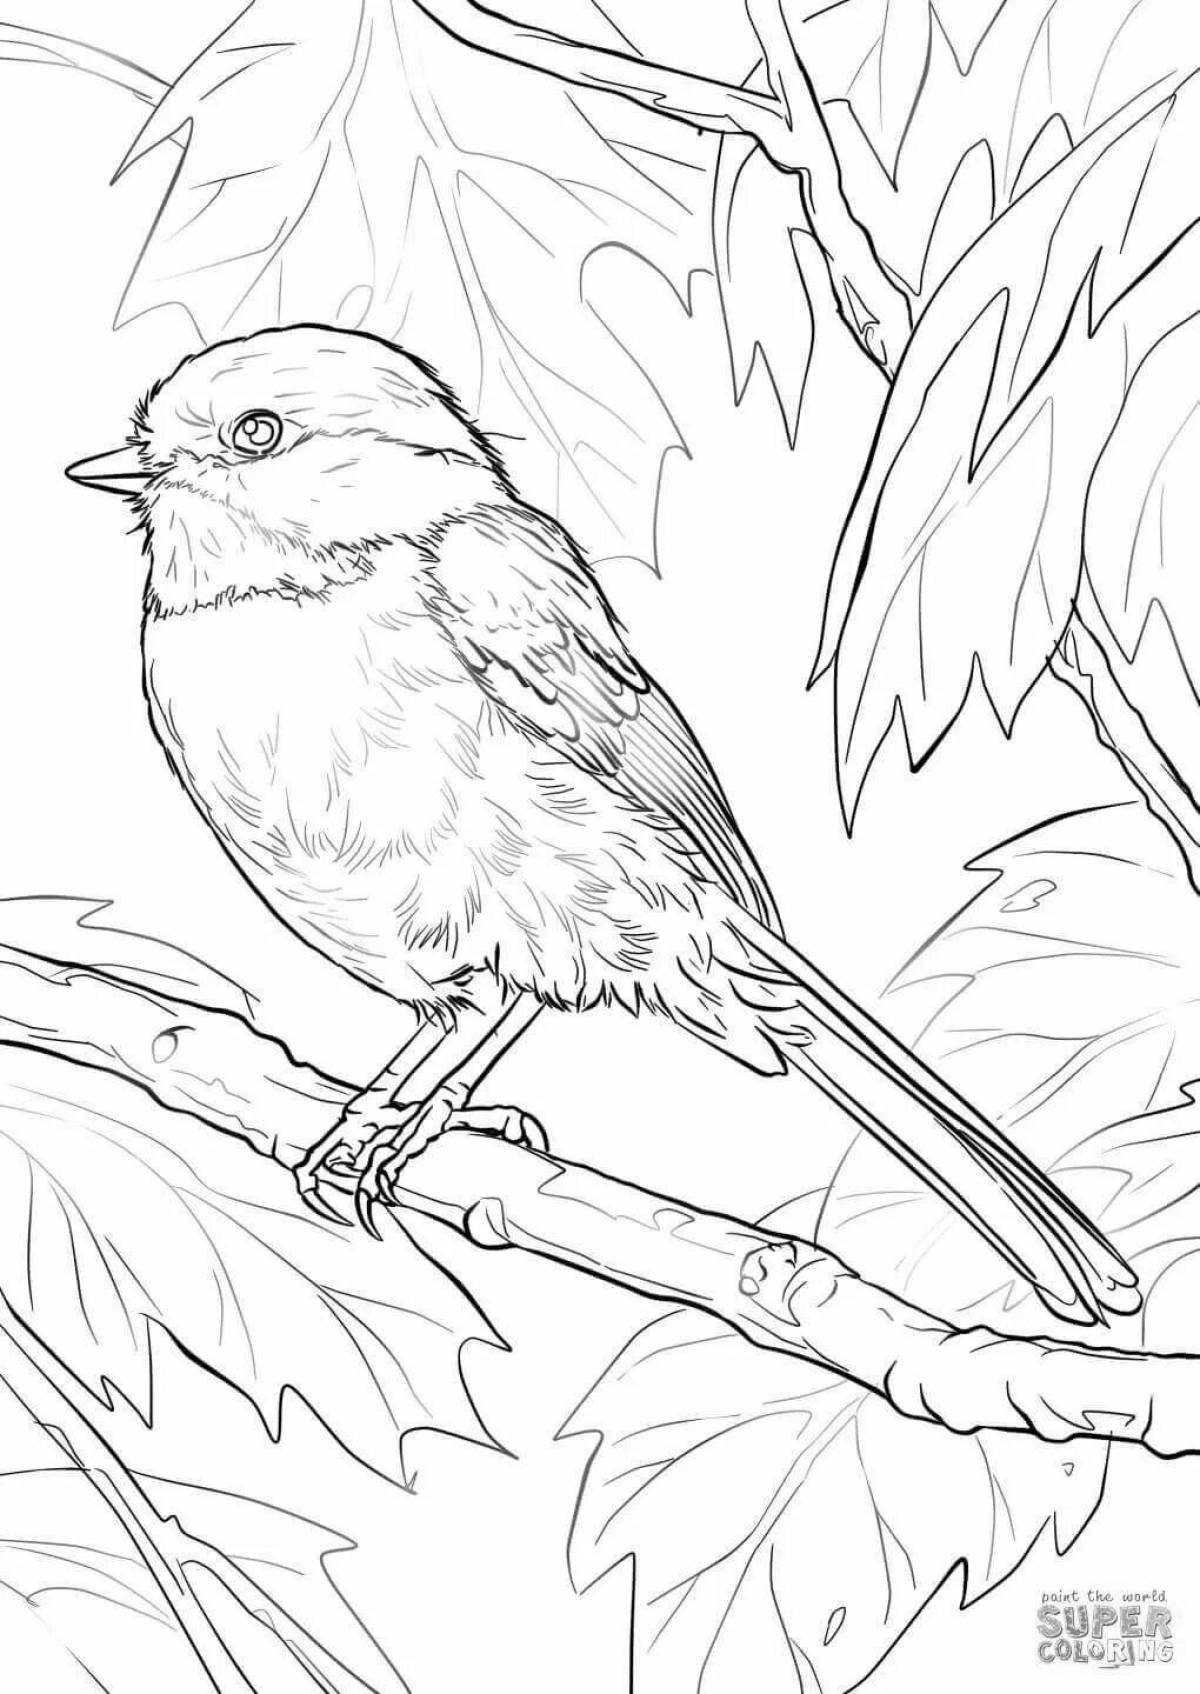 Awesome tit coloring page